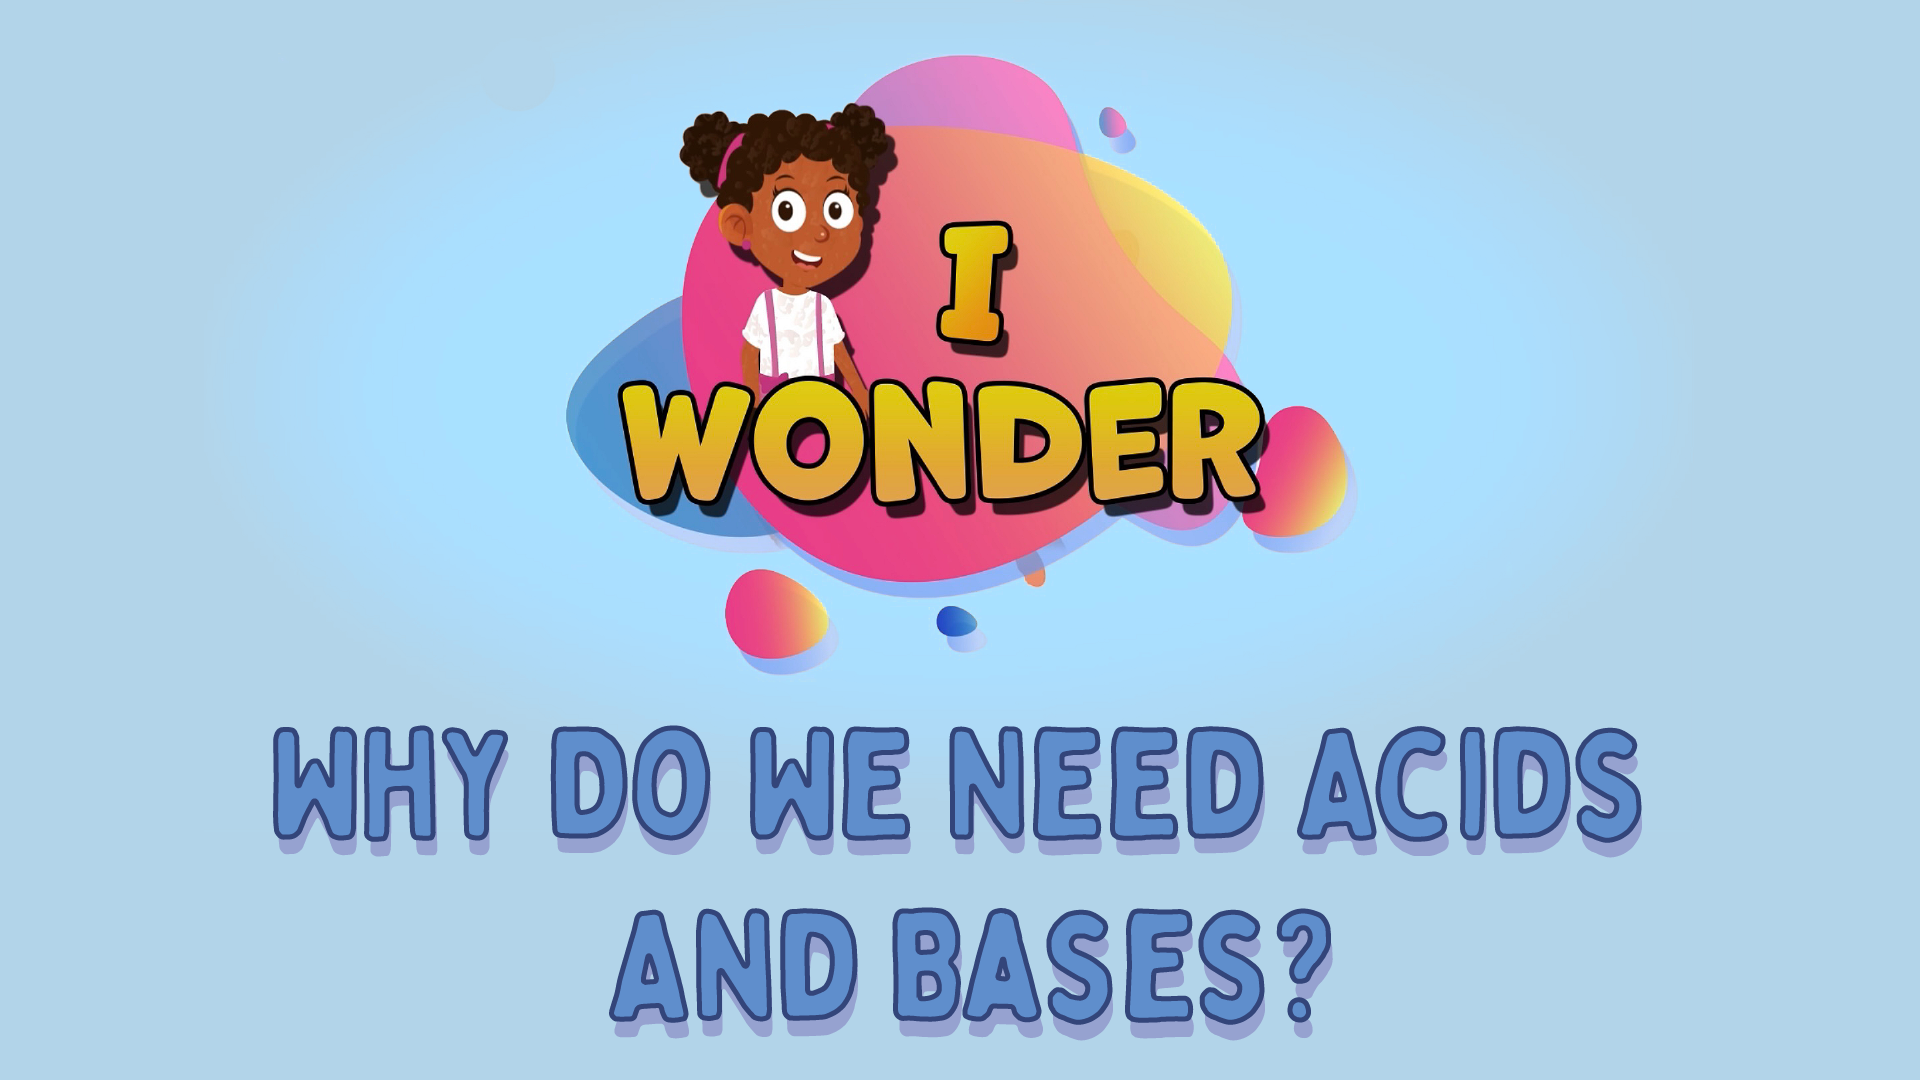 Why Do We Need Acids And Bases?